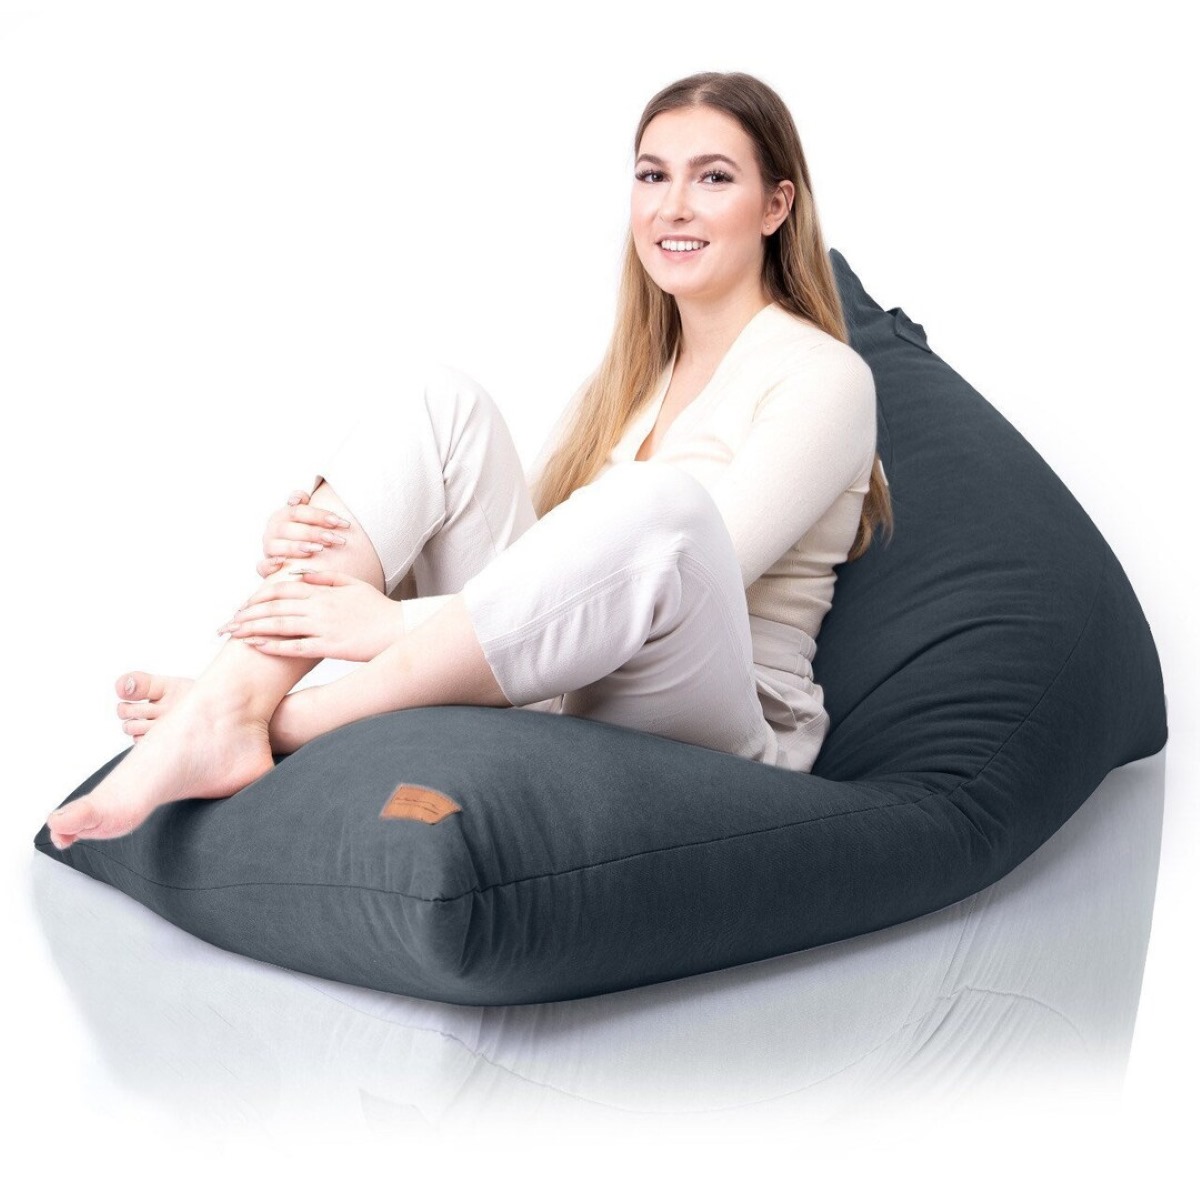 How To Choose The Right Bean Bag Chair Size